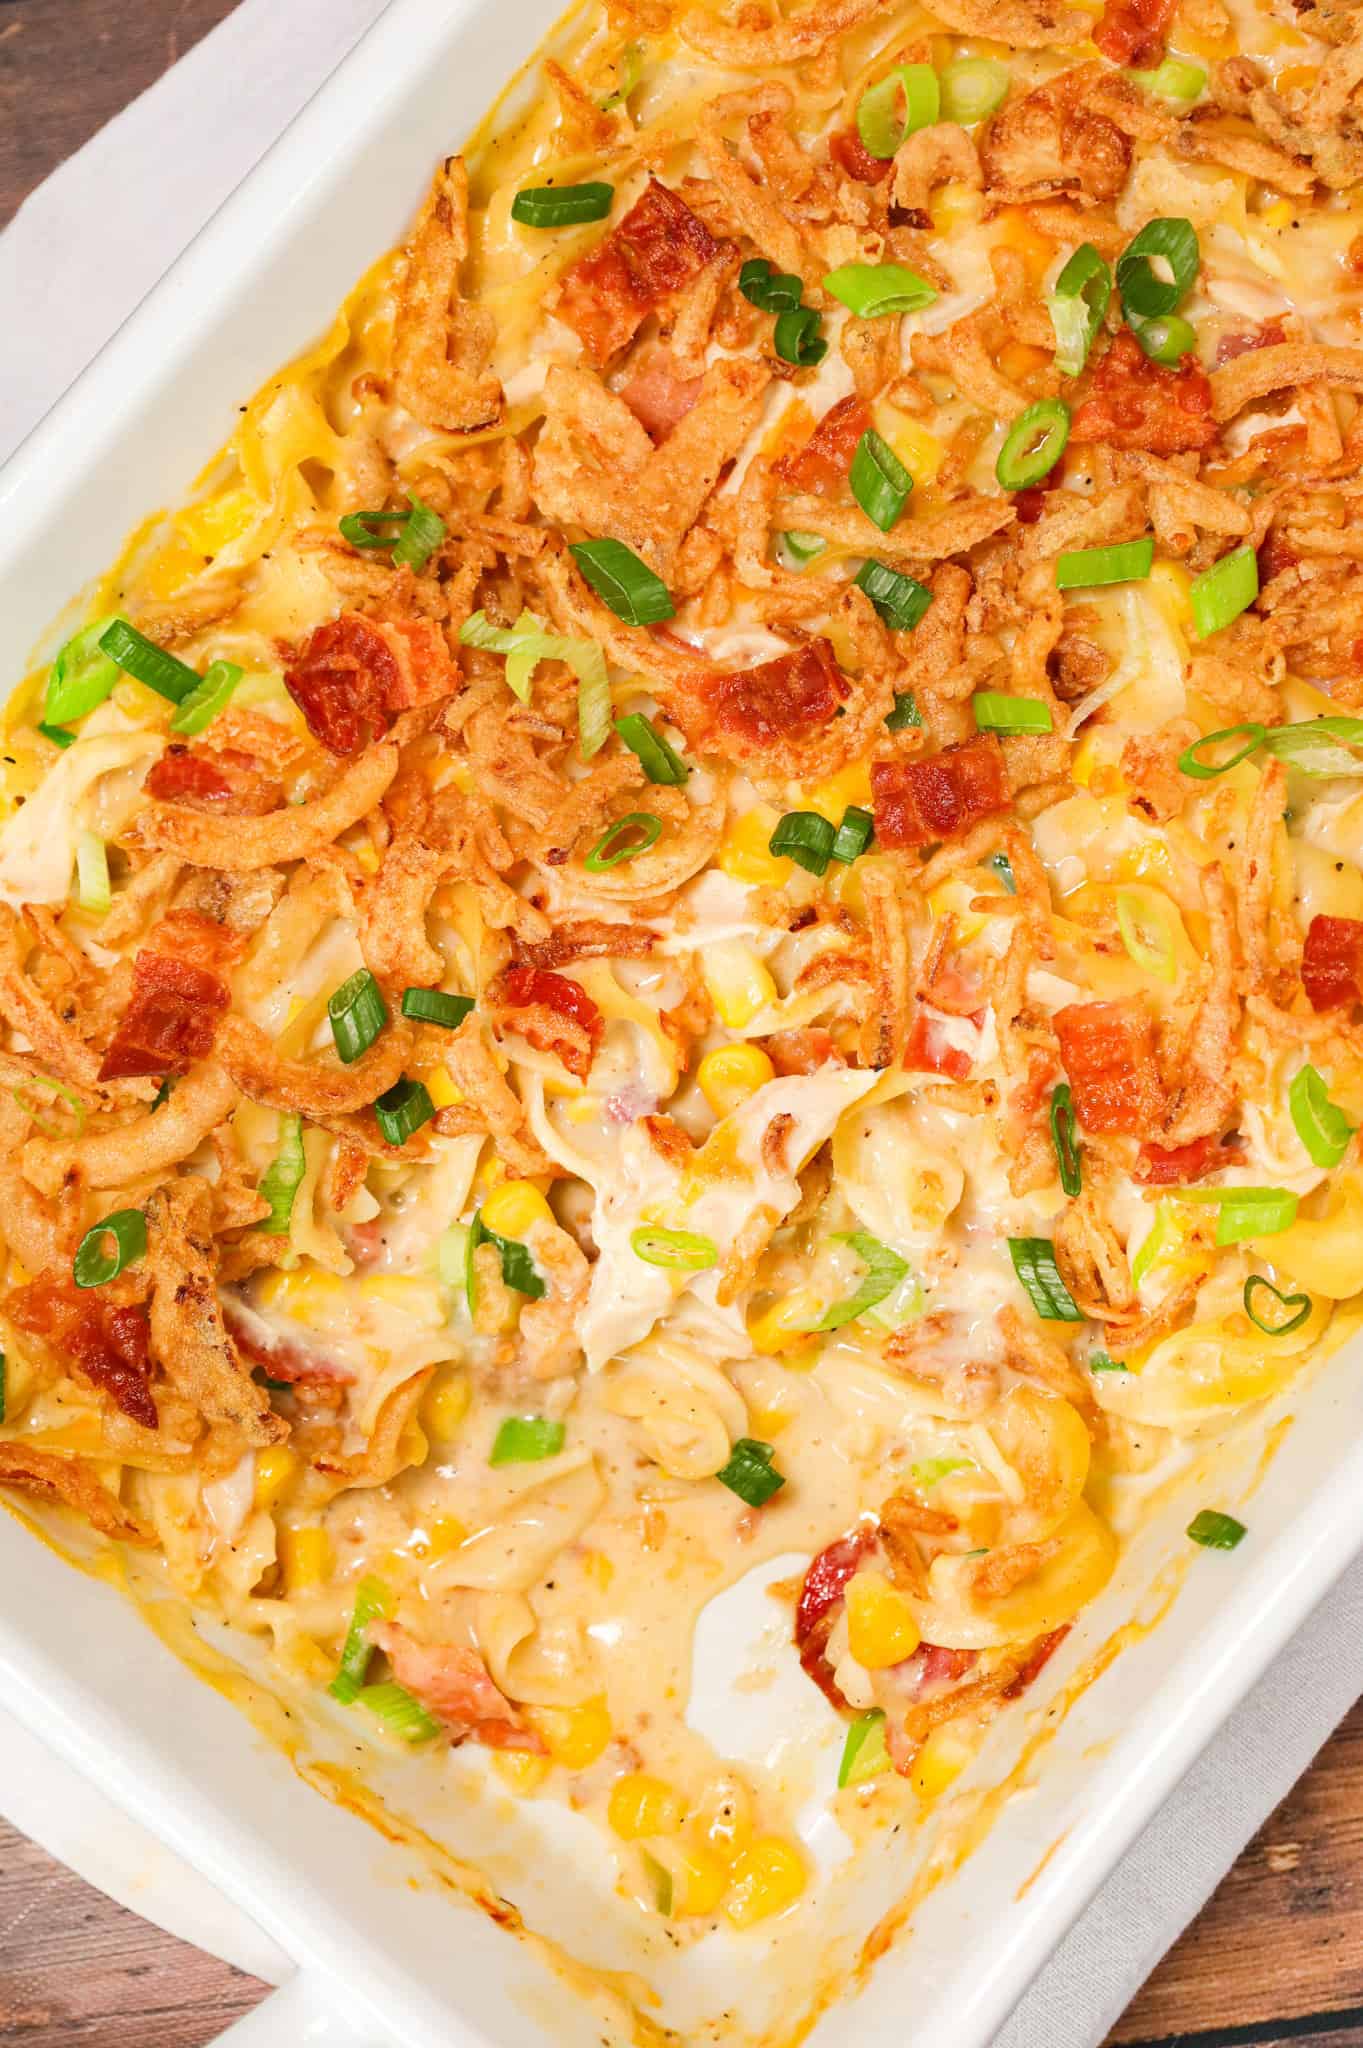 Ultimate Chicken Casserole is a hearty casserole loaded with egg noodles, shredded chicken, chopped bacon, green onions and shredded cheese all tossed in a creamy soup mixture and baked with French's crispy fried onions on top.